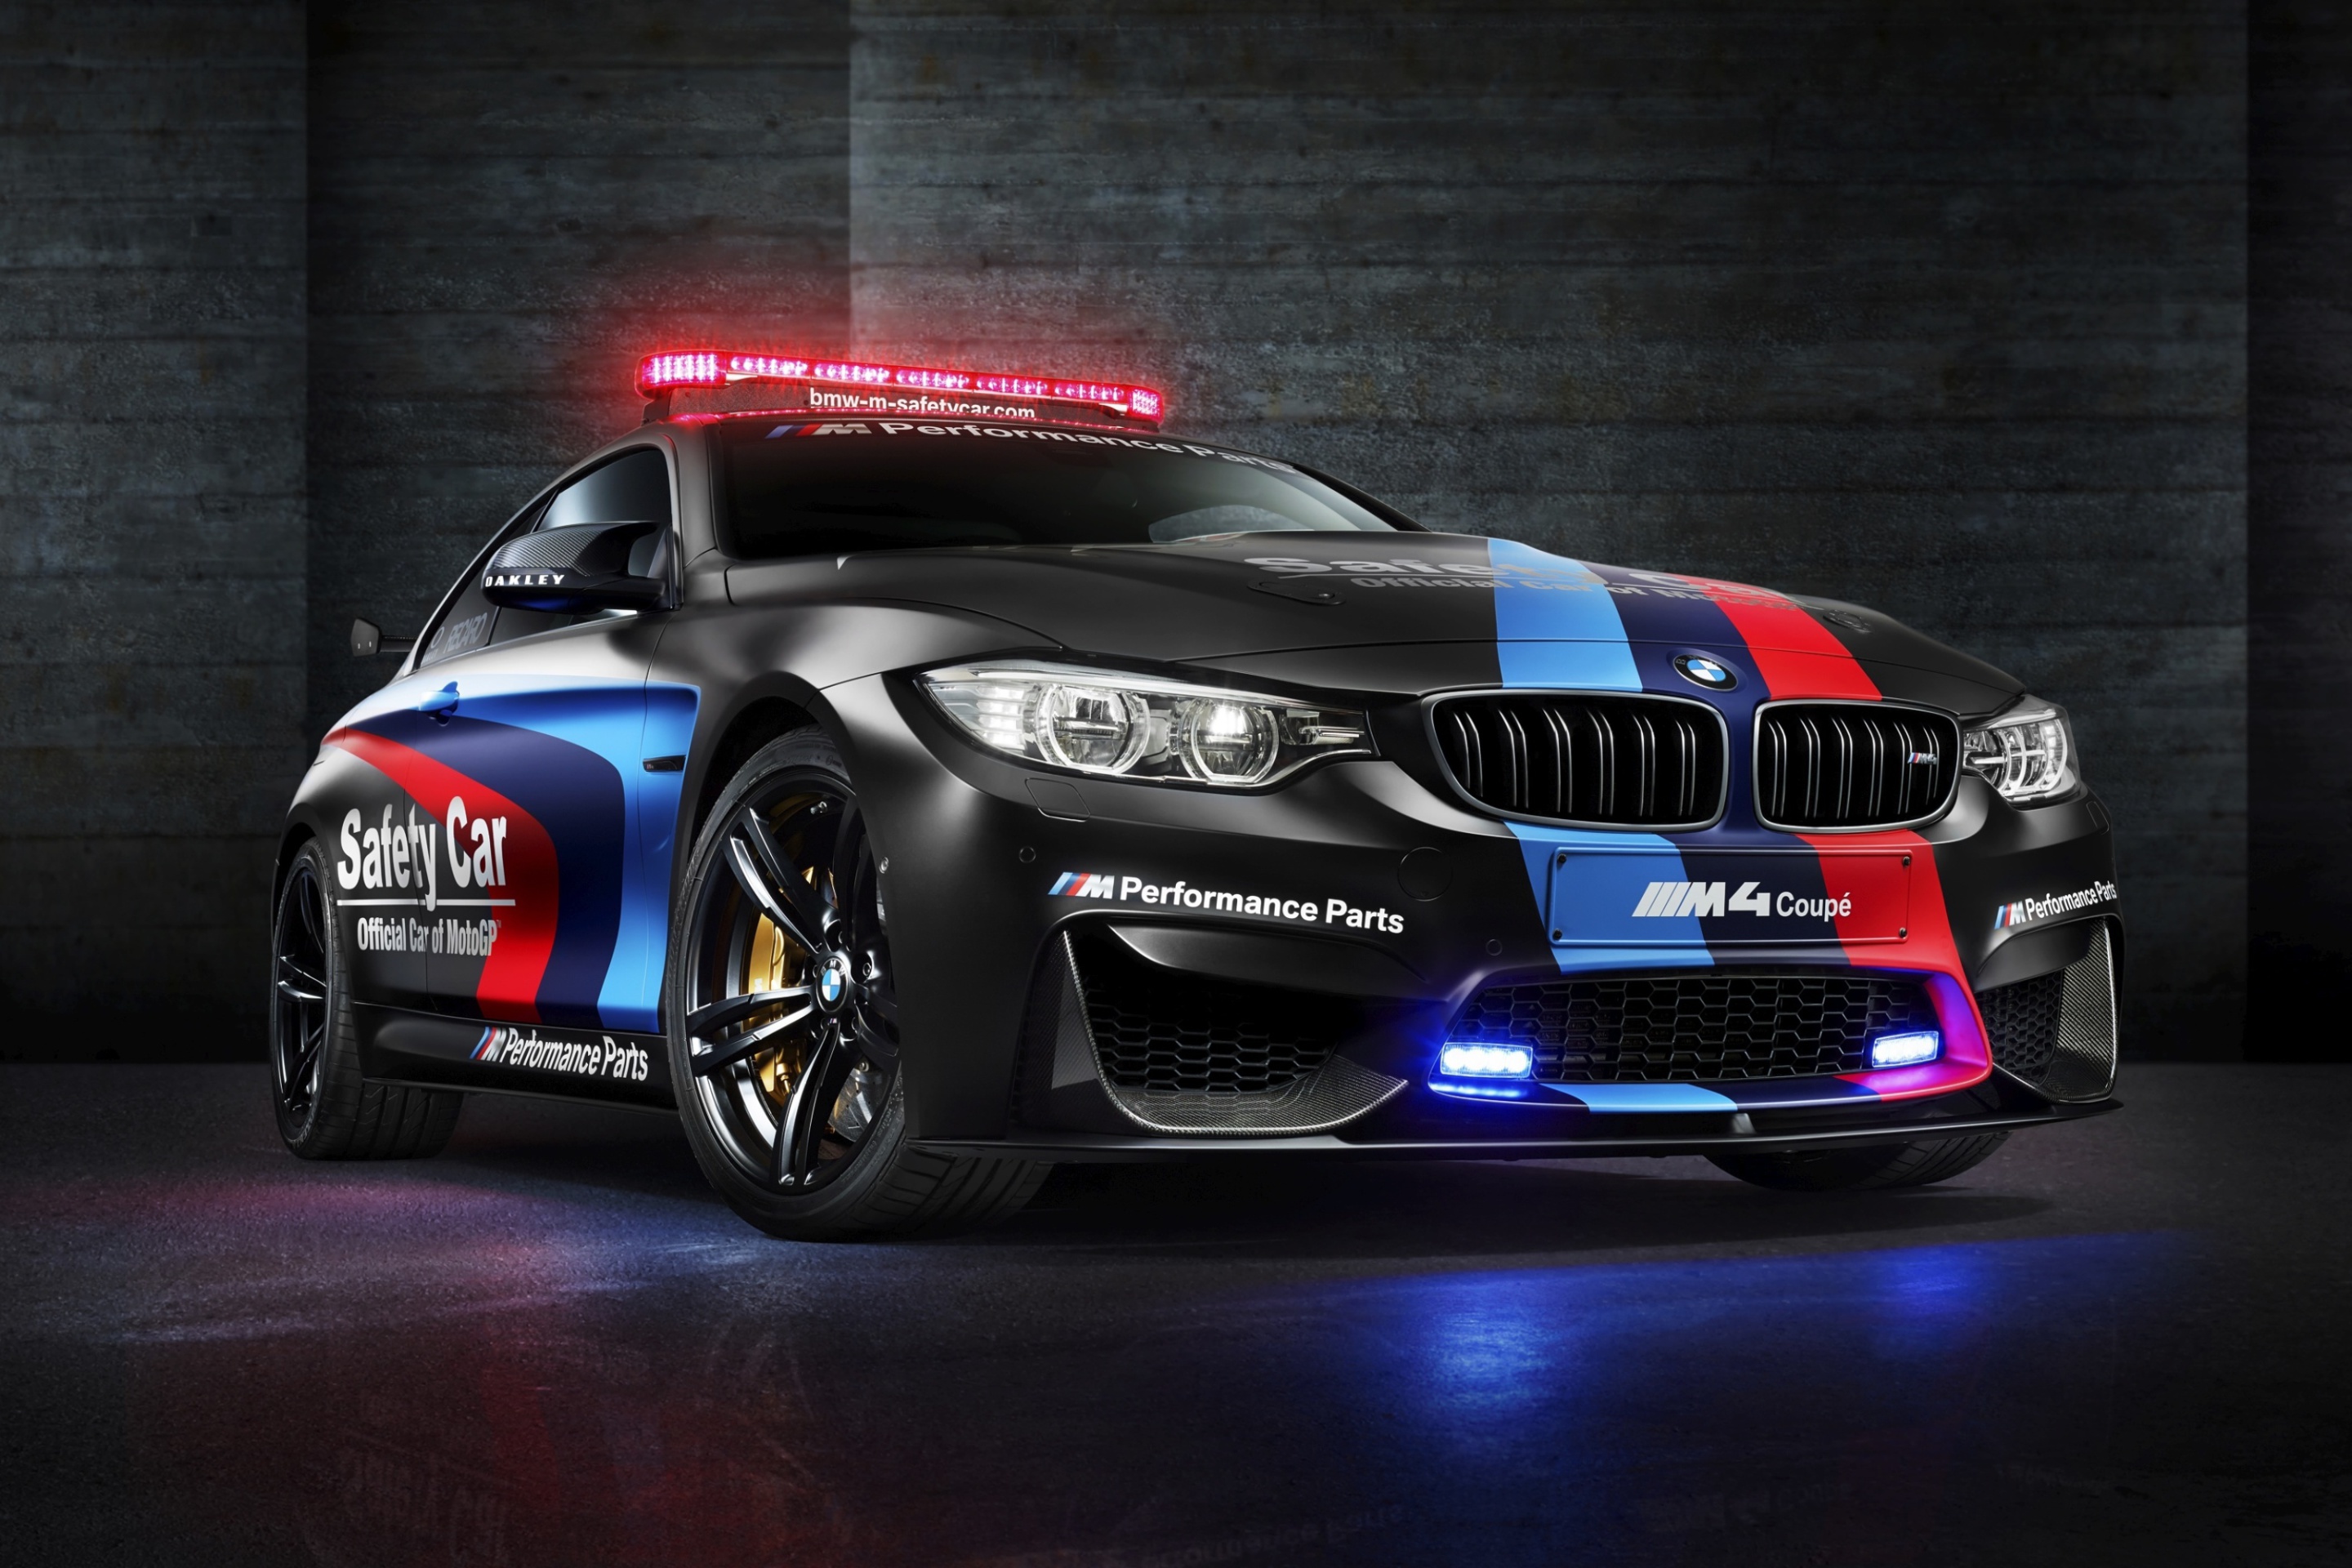 BMW M4 Coupe Police wallpaper 2880x1920